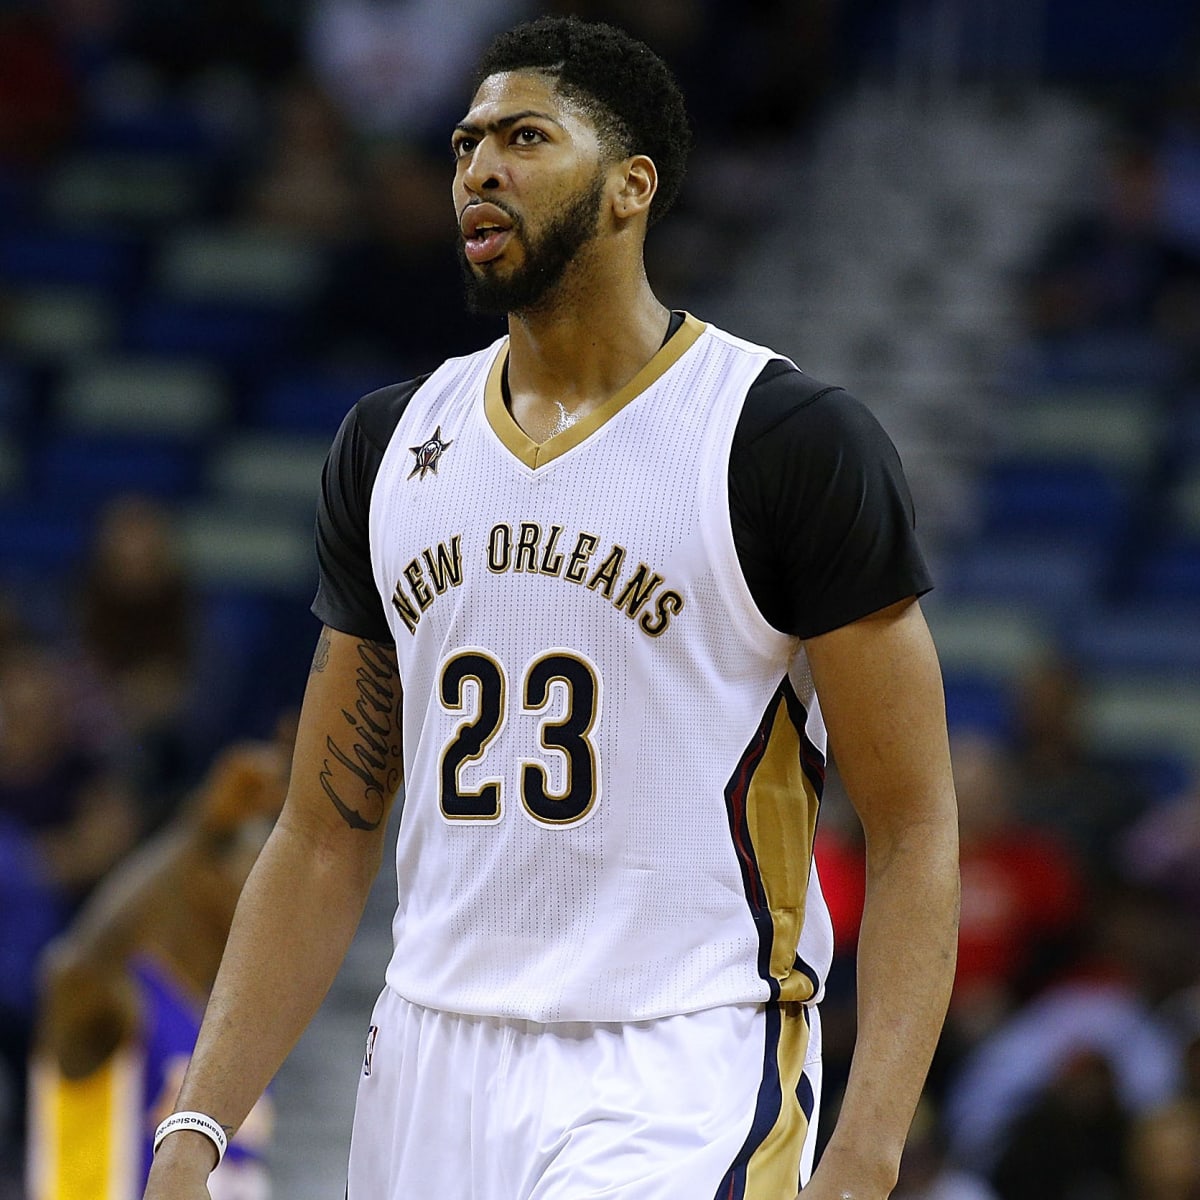 NBA exec on Anthony Davis: 'That back doesn't look healthy